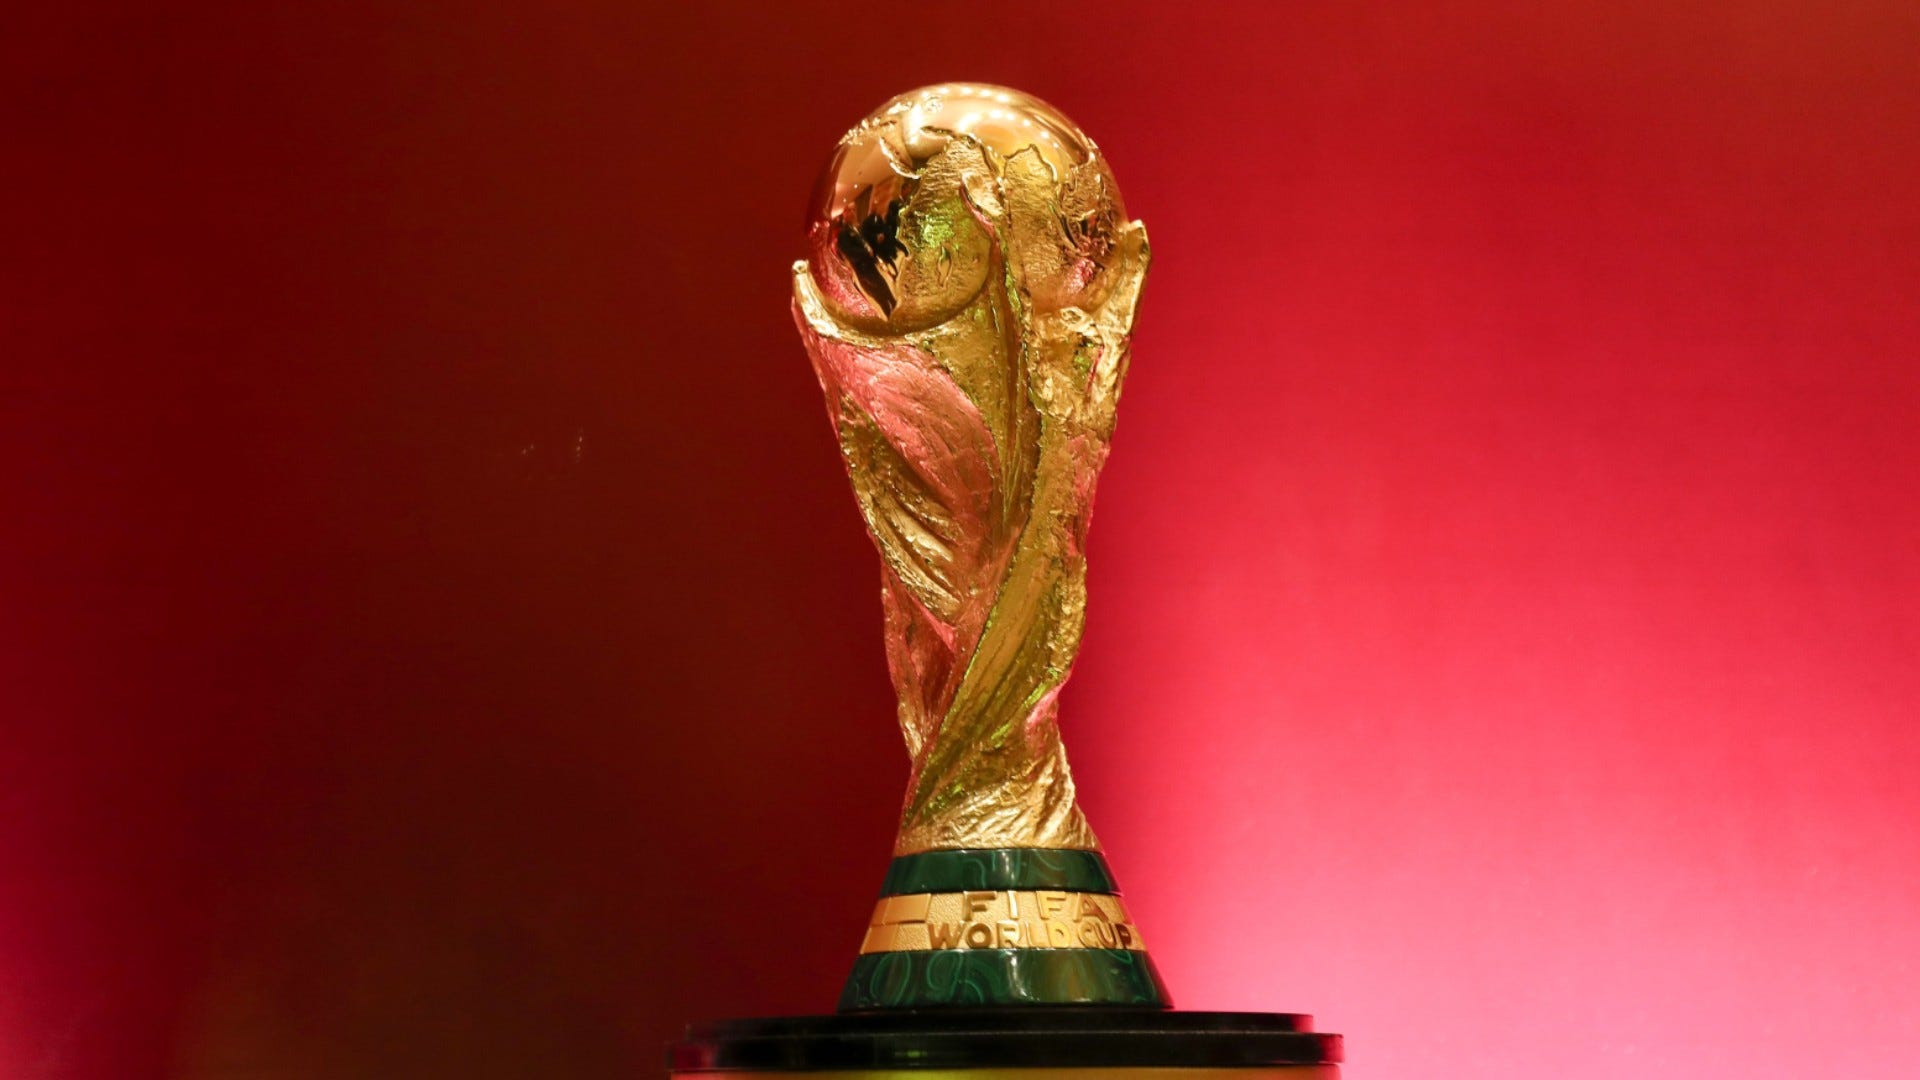 FIFA World Cup Trophy Details: FIFA World Cup final 2022 Trophy